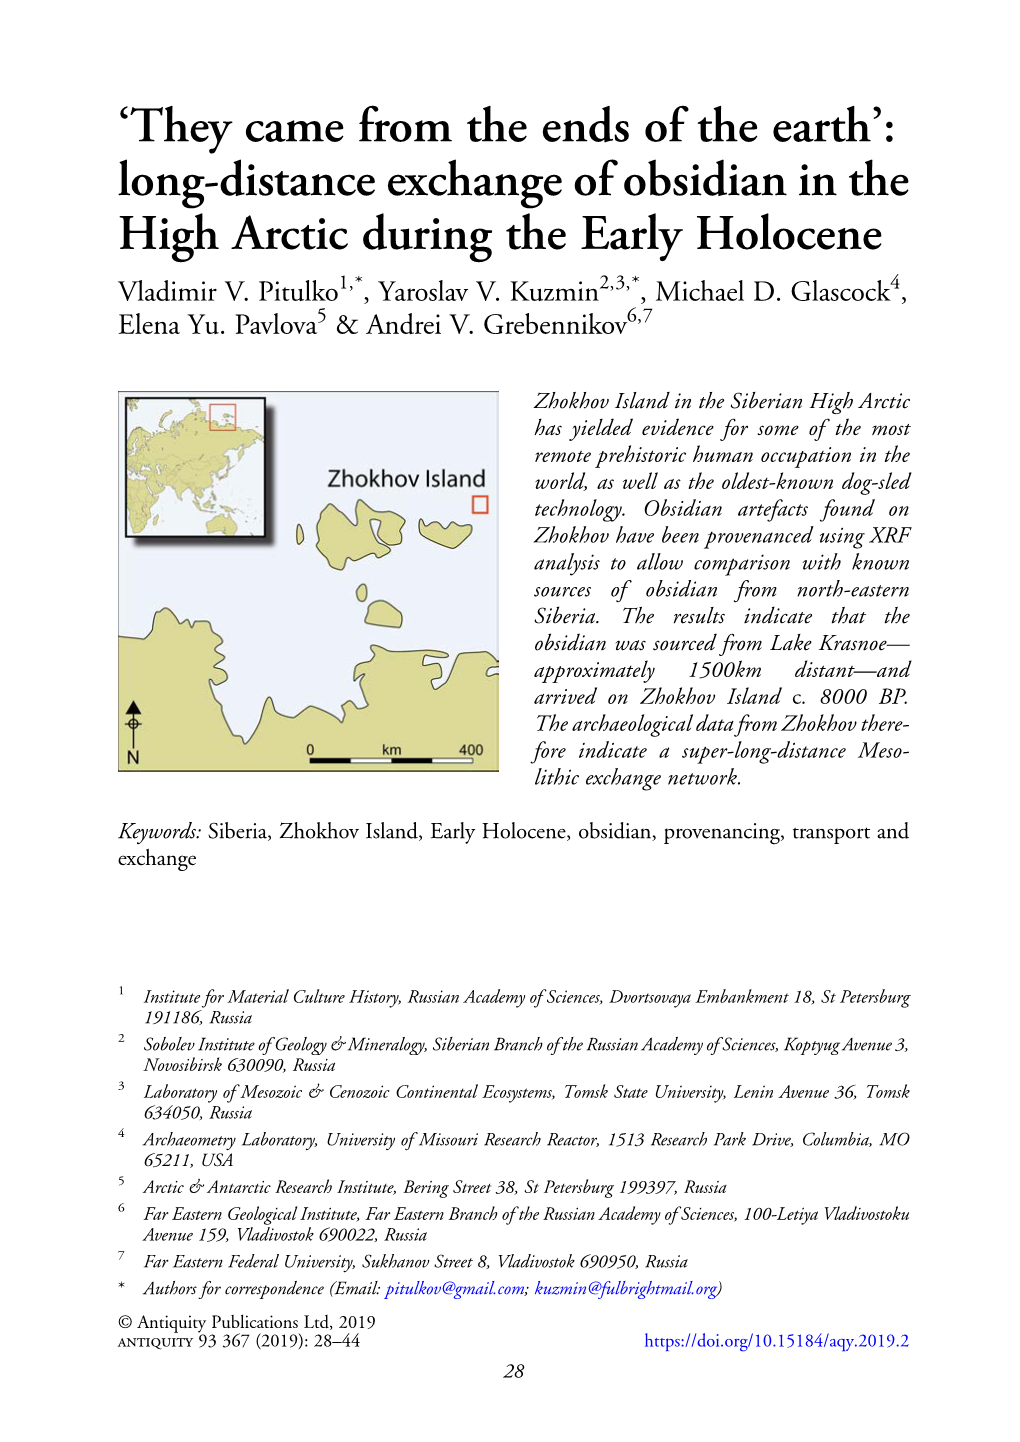 Long-Distance Exchange of Obsidian in the High Arctic During the Early Holocene Vladimir V